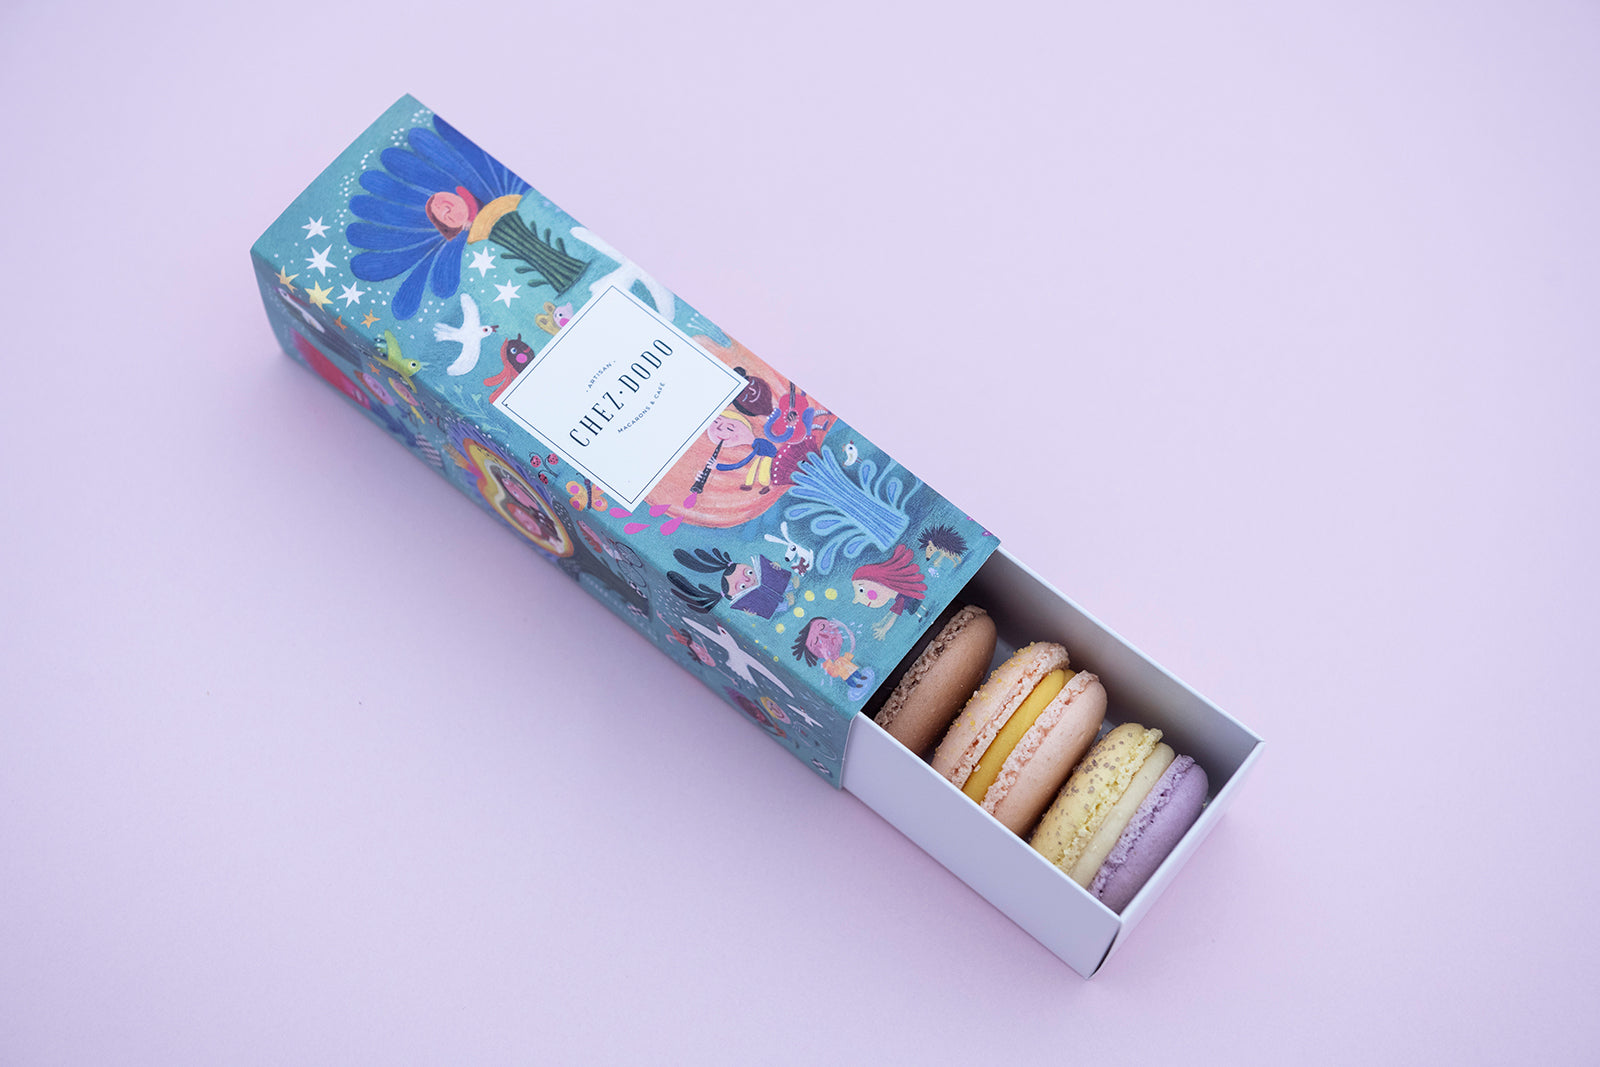 6-piece macaron selection in charity box (turquoise)